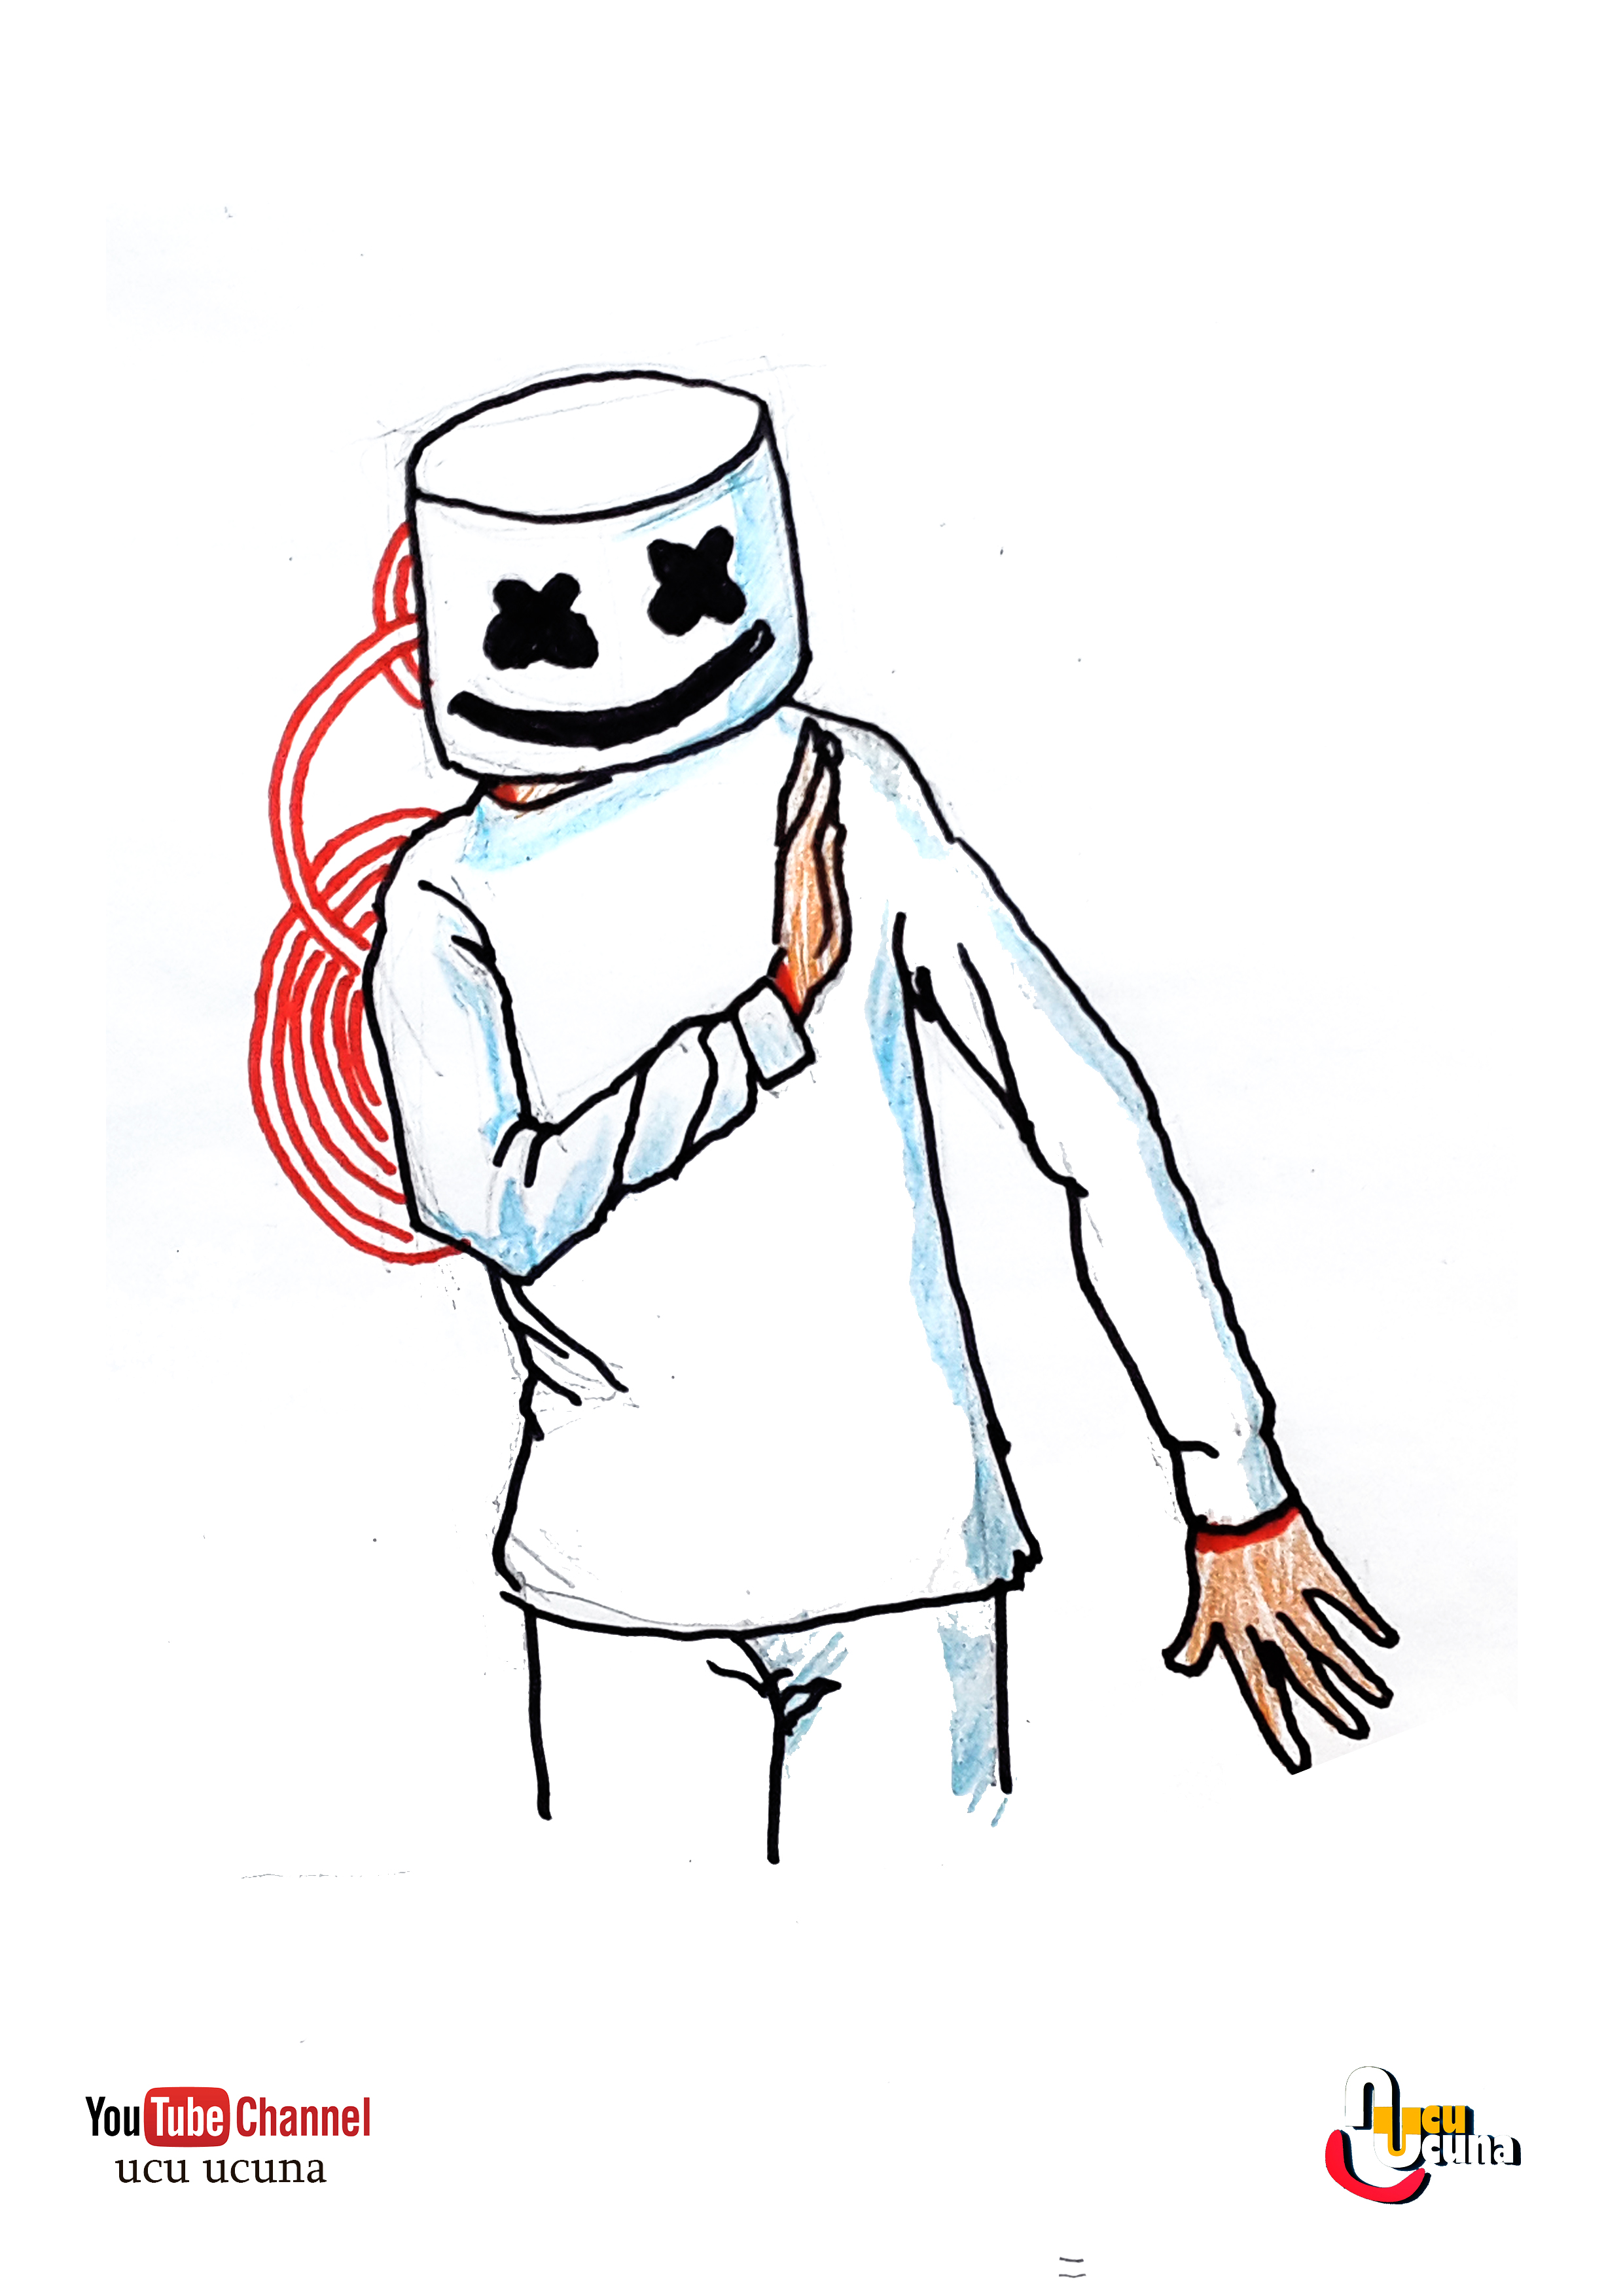 Hi  firend i show you how to draw marshmello, fortnite game character same time, i hope you like it  if you like and watch how to draw click my youtube channel ucu ucuna